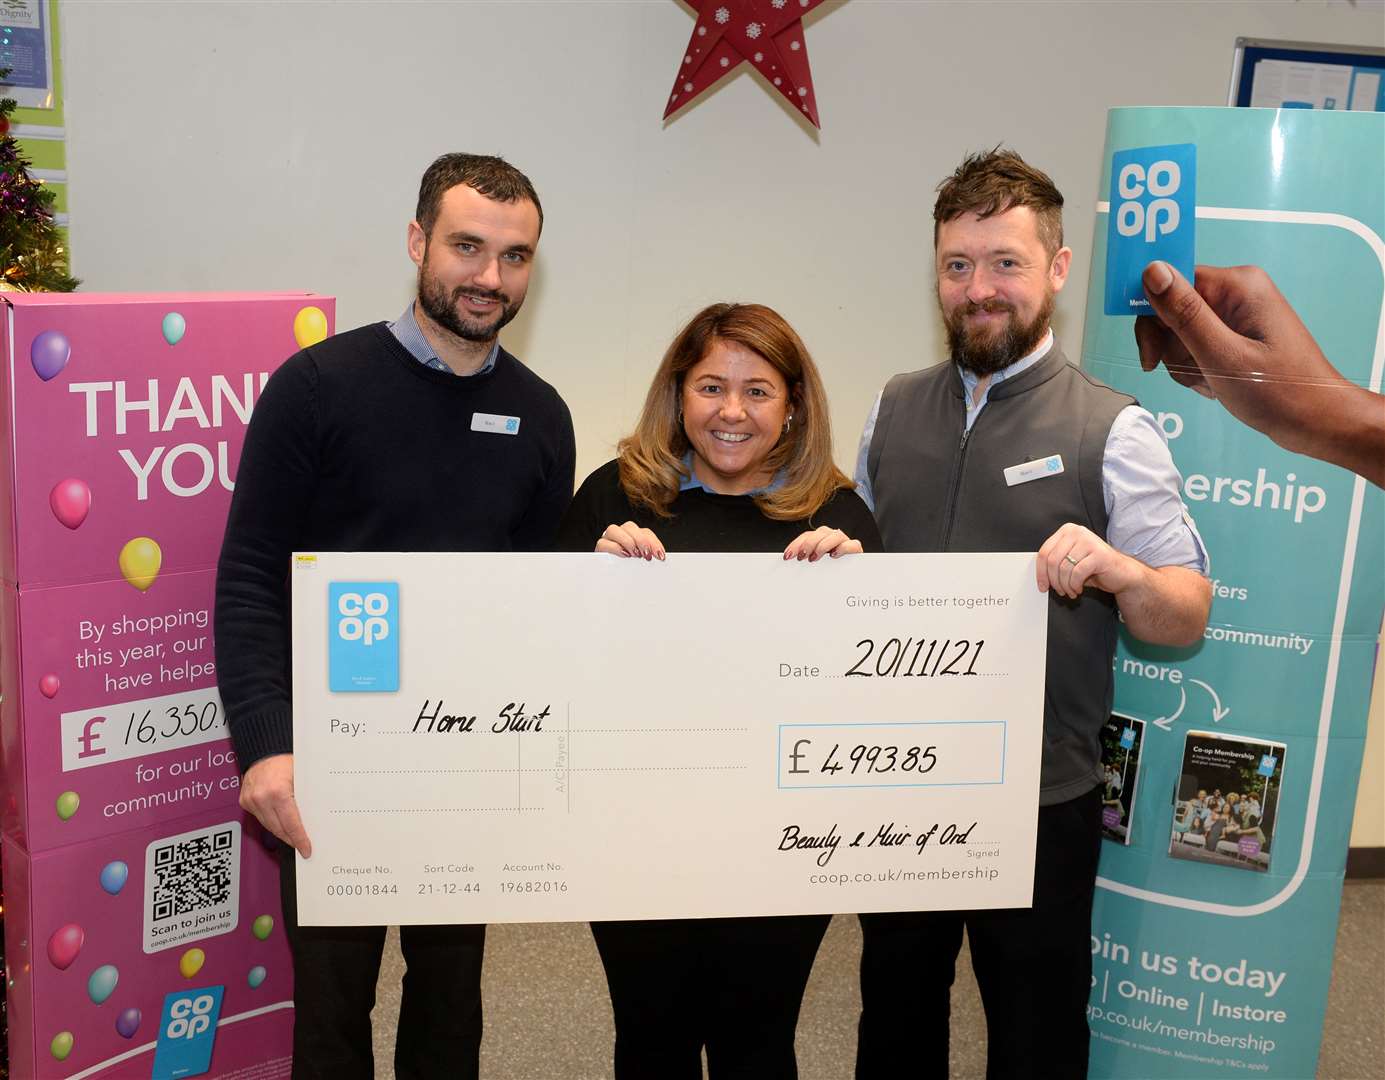 Co-op's Neil Cameron, Lorna Millard and Neil Morrison with a donation of £49983.85 on behalf of Home Start. Picture Gary Anthony